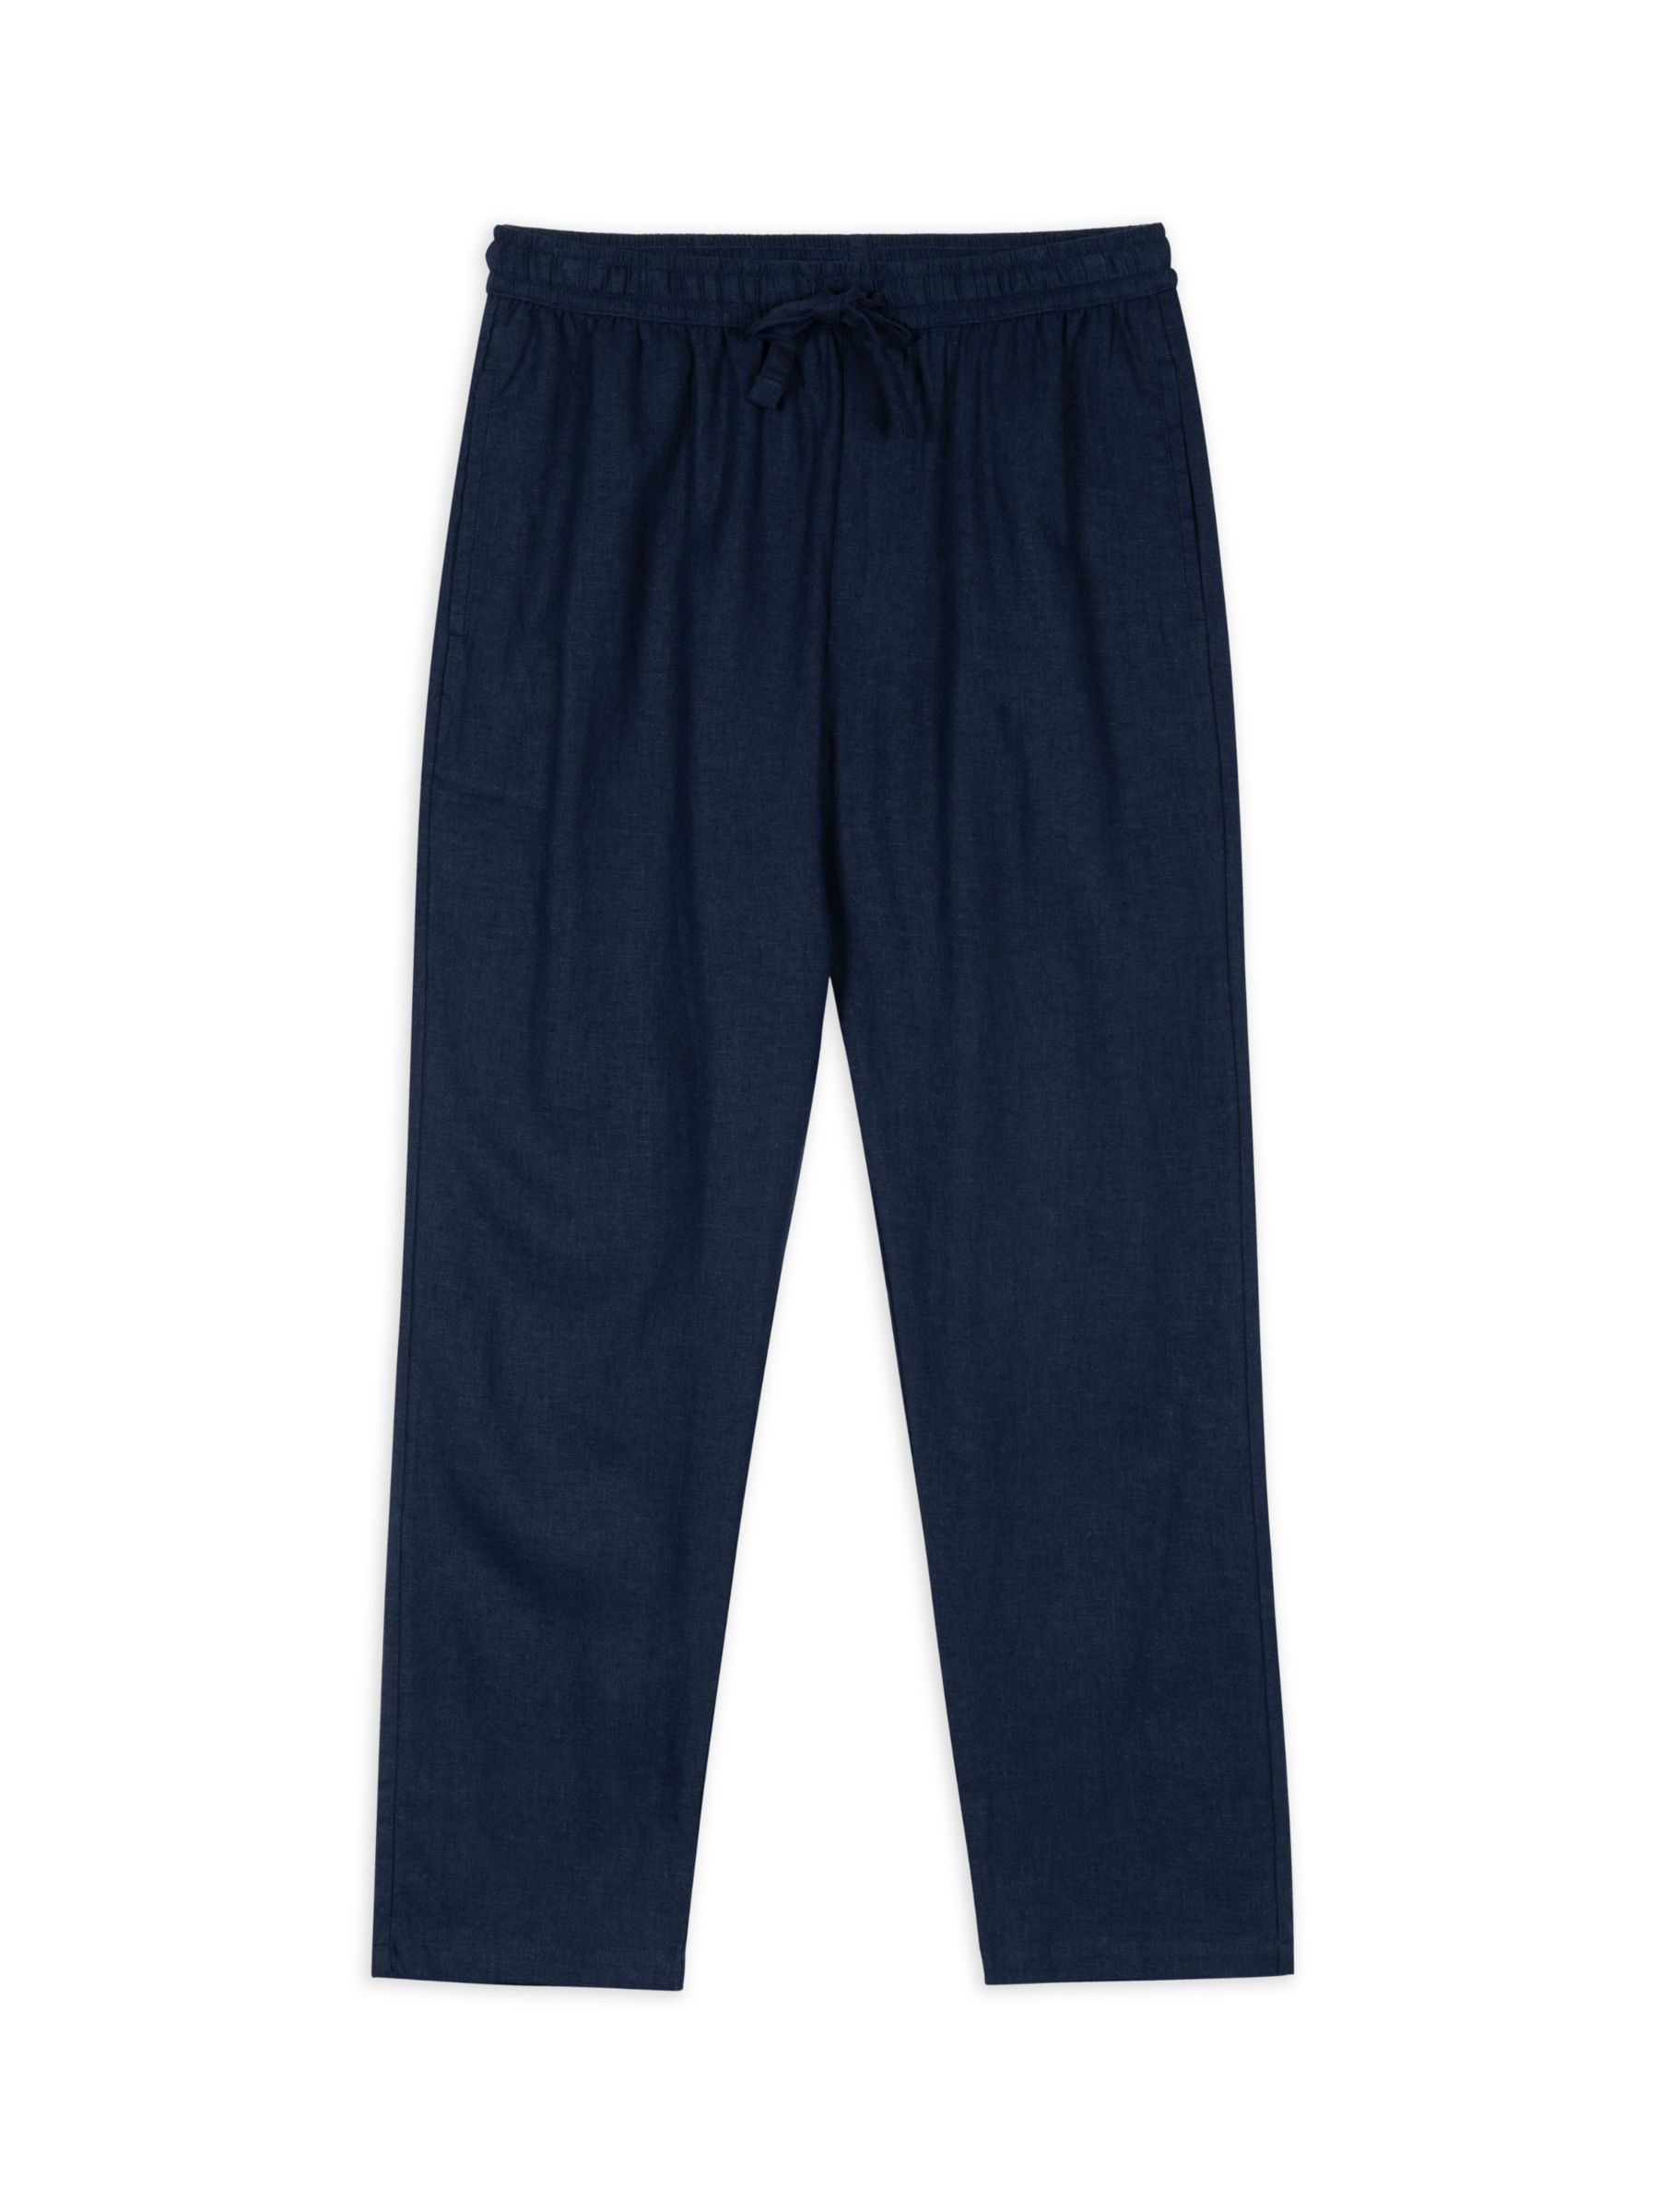 Chelsea Peers Linen Blend Relaxed Trousers, Navy, L